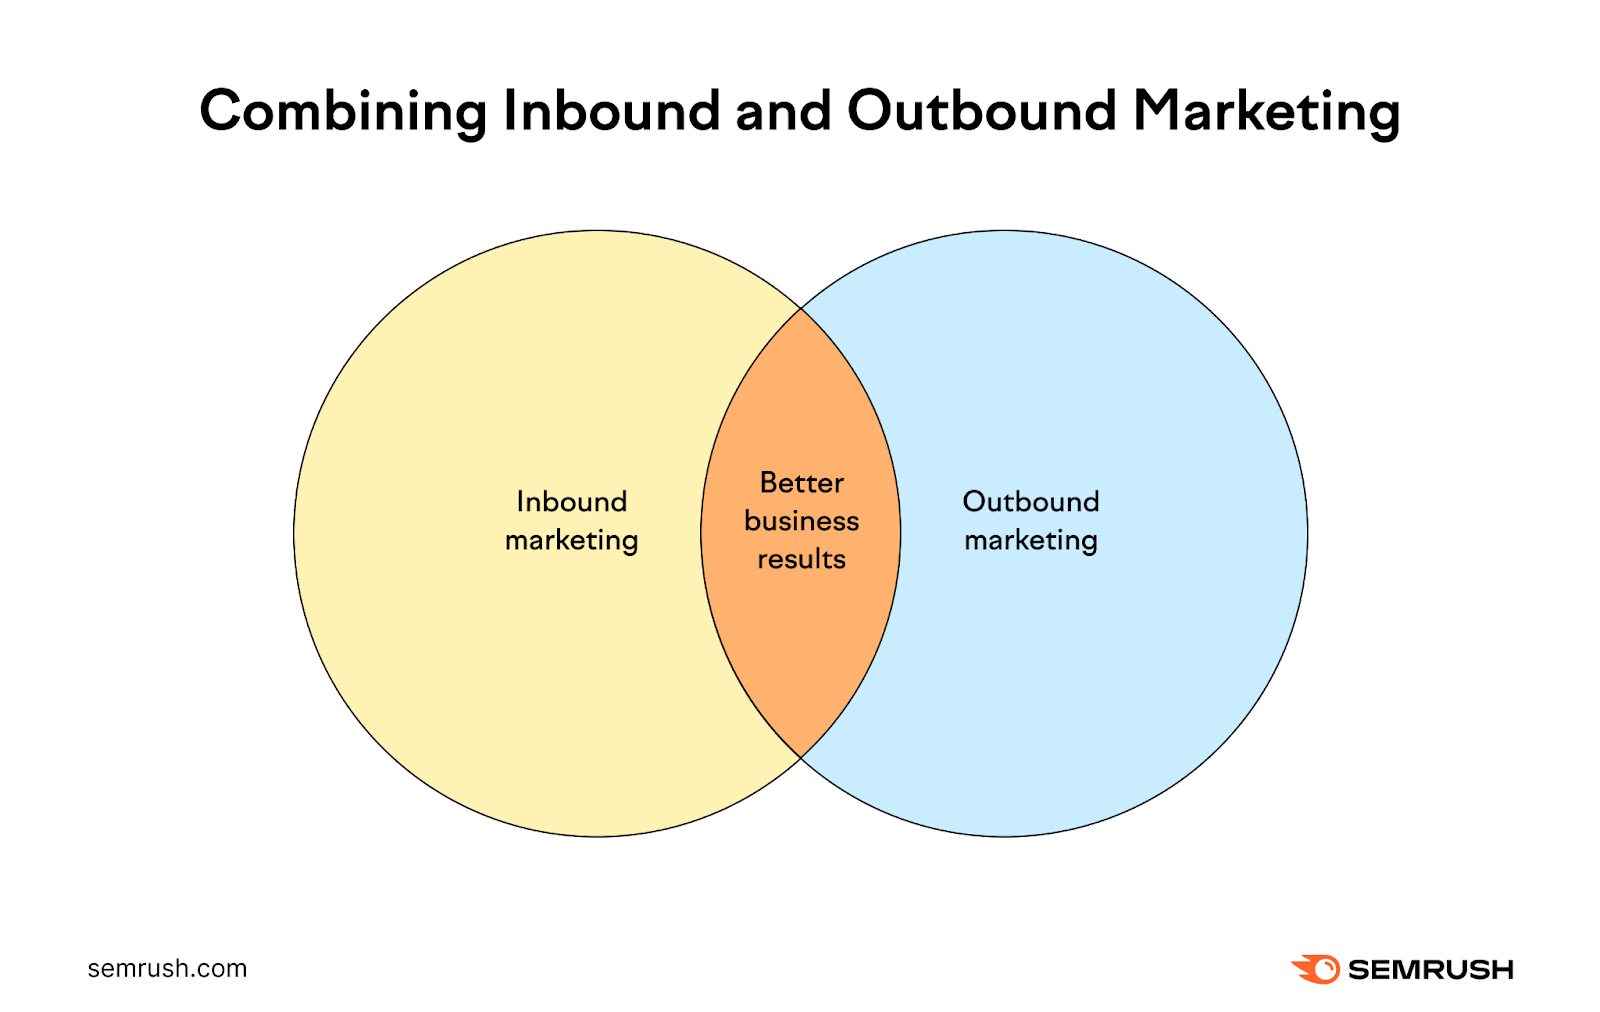 Semrush infographic showing that combining inbound and outbound marketing brings better business results